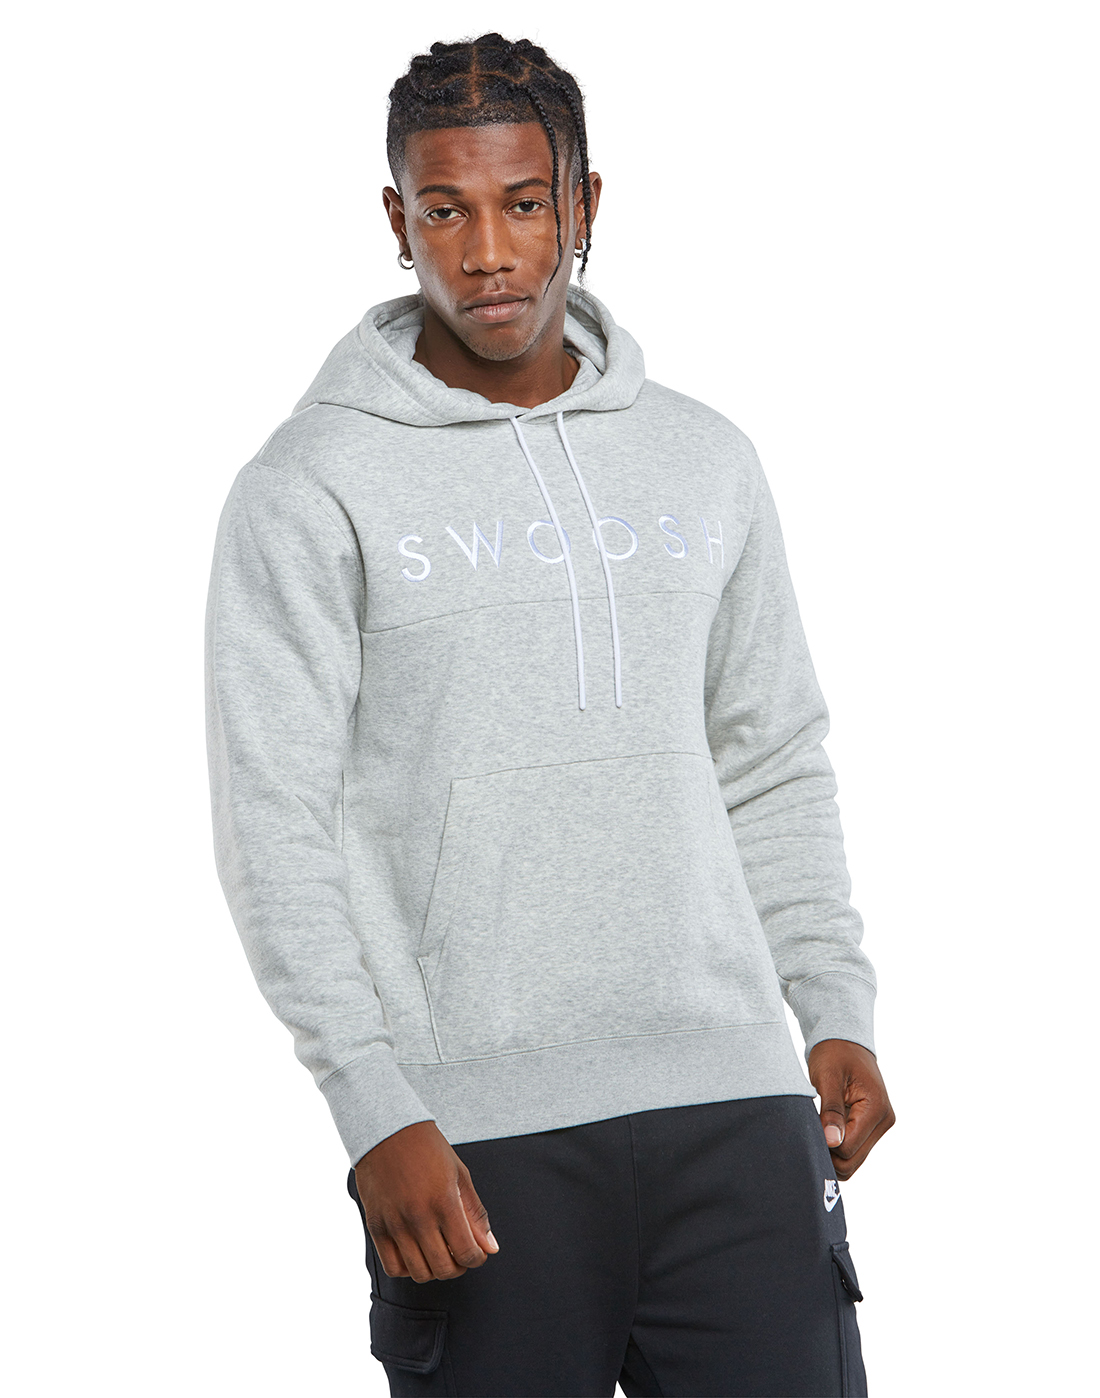 Nike Mens Swoosh Pullover Hoodie - Grey | Life Style Sports IE